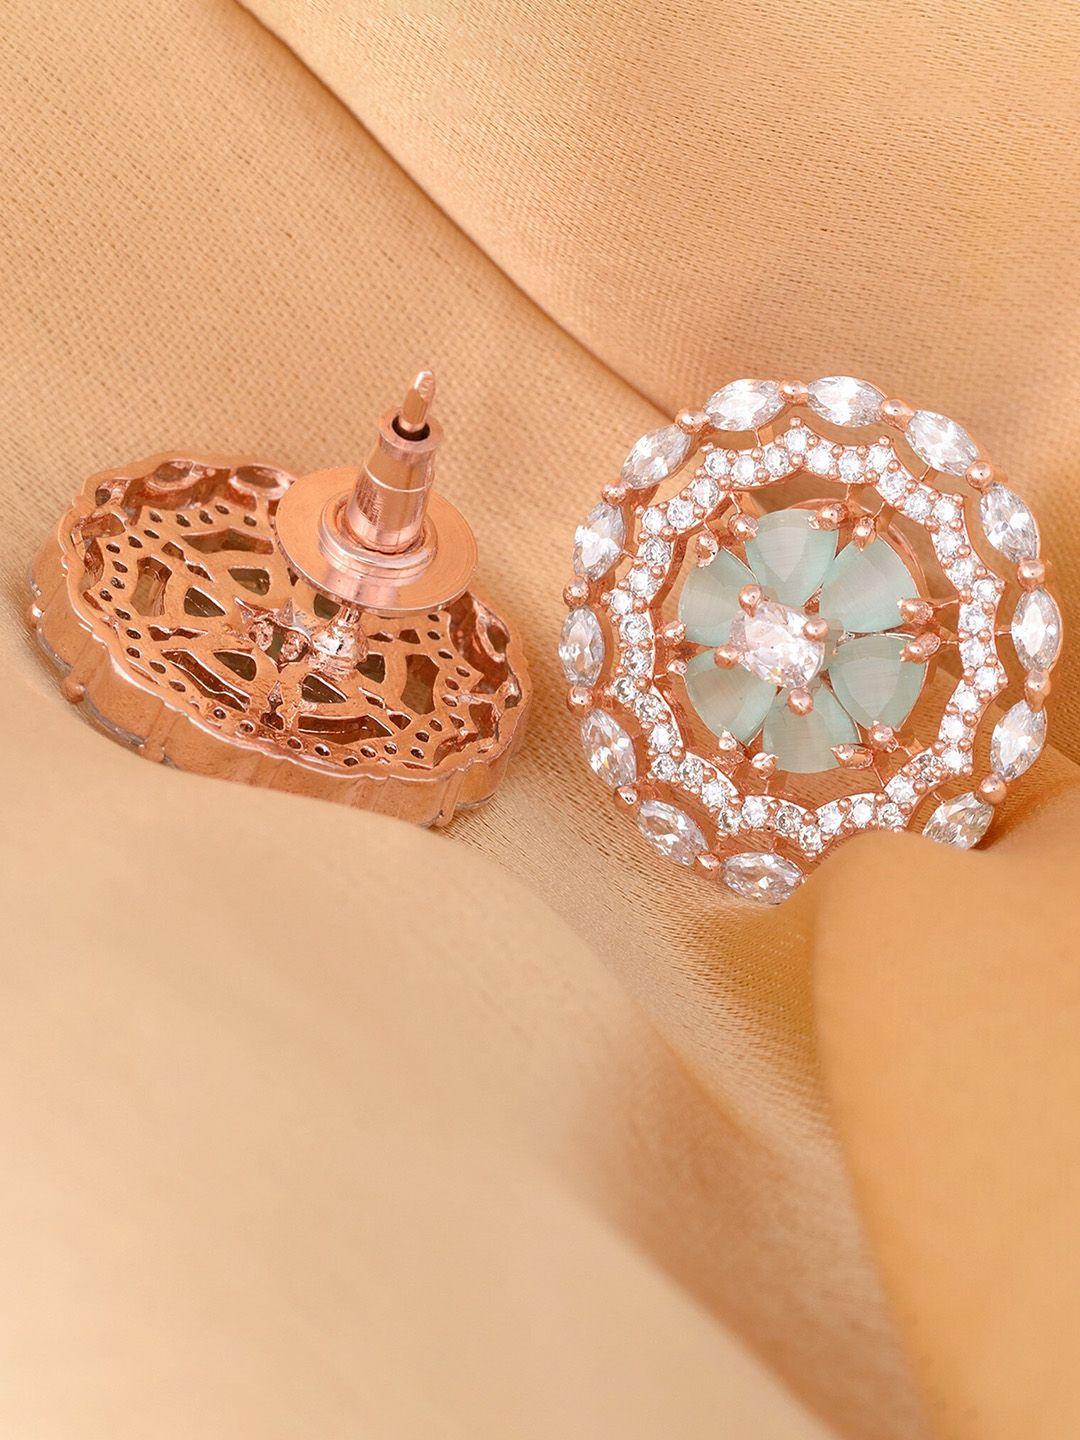 saraf rs jewellery sea green & white rose-gold-plated ad circular studs